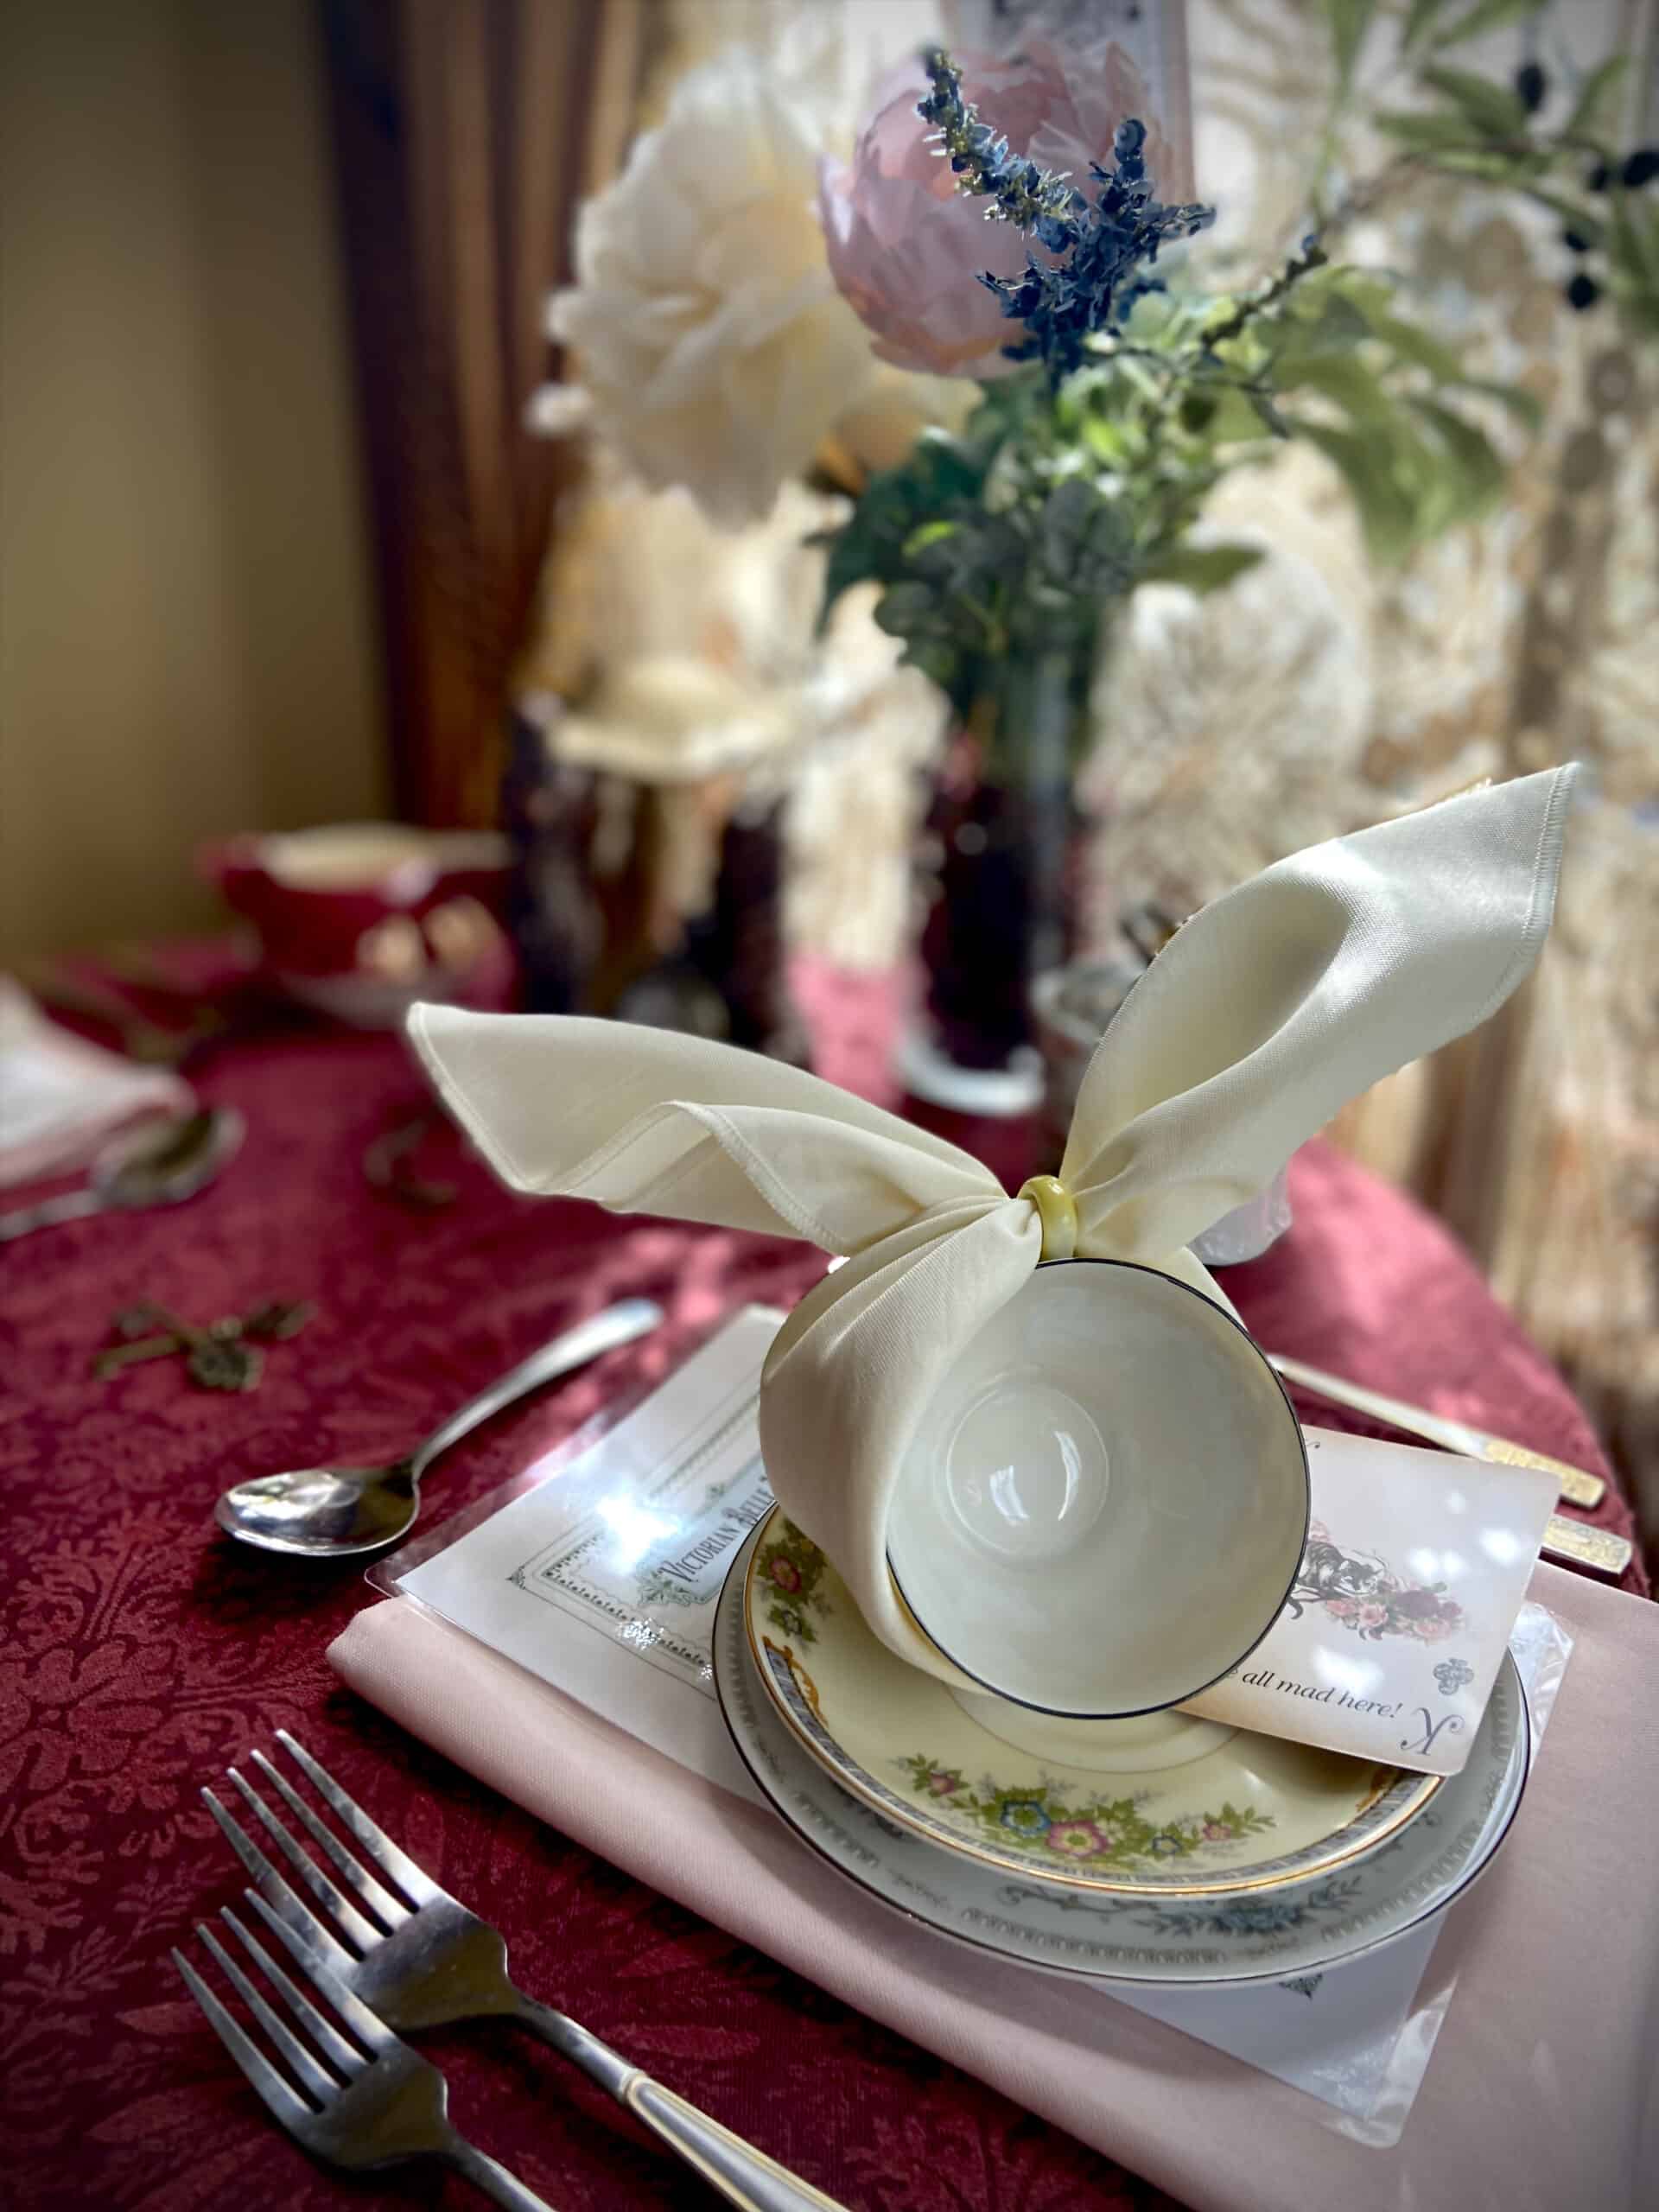 A teacup with napkin tied to look like rabbit ears sits on a plate and saucer with silverware and Alice in Wonderland themed decorations